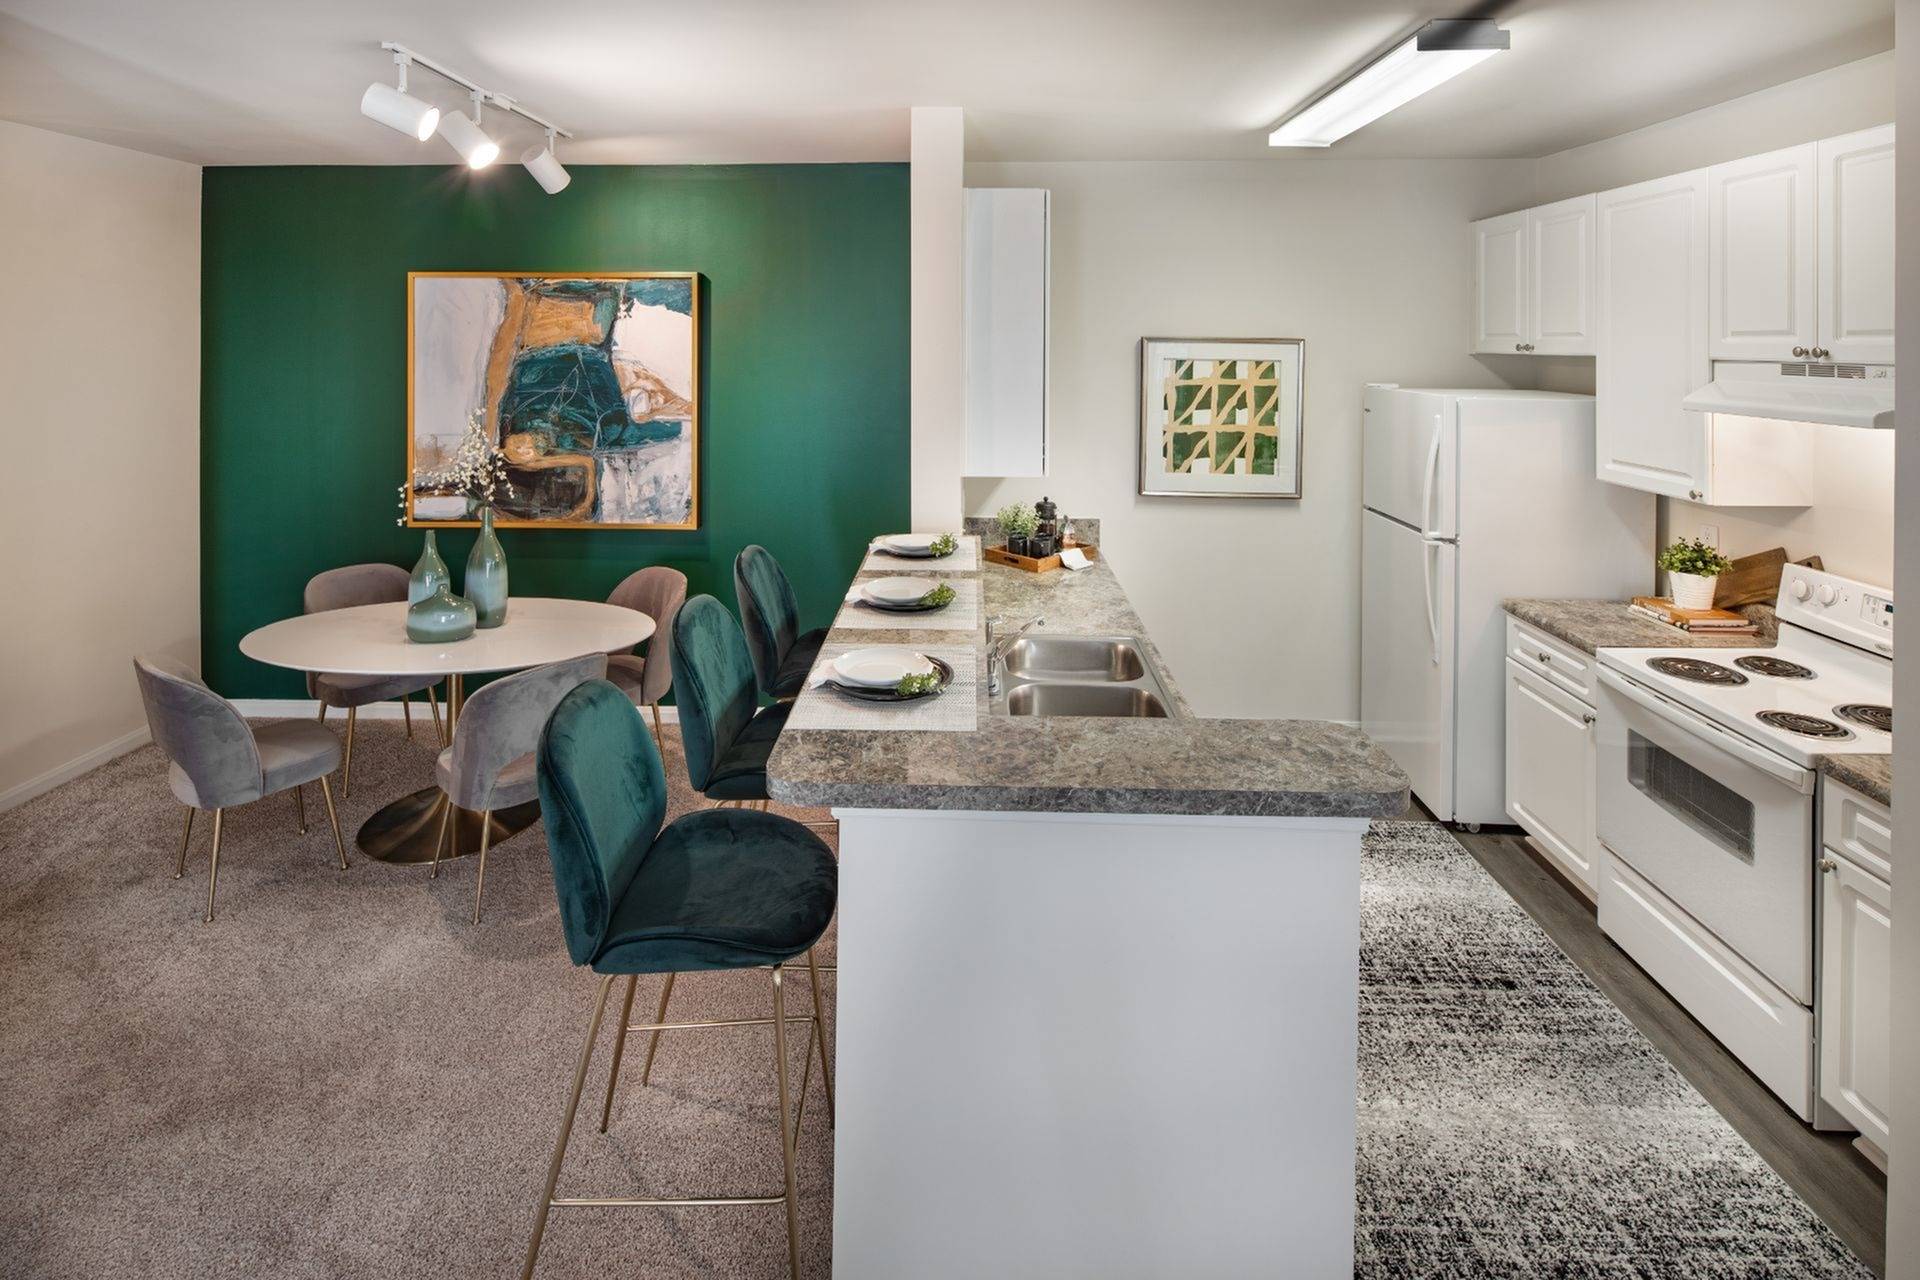 Kitchen and Dining Room | Apartments in Cumming, GA | Summit Crossing